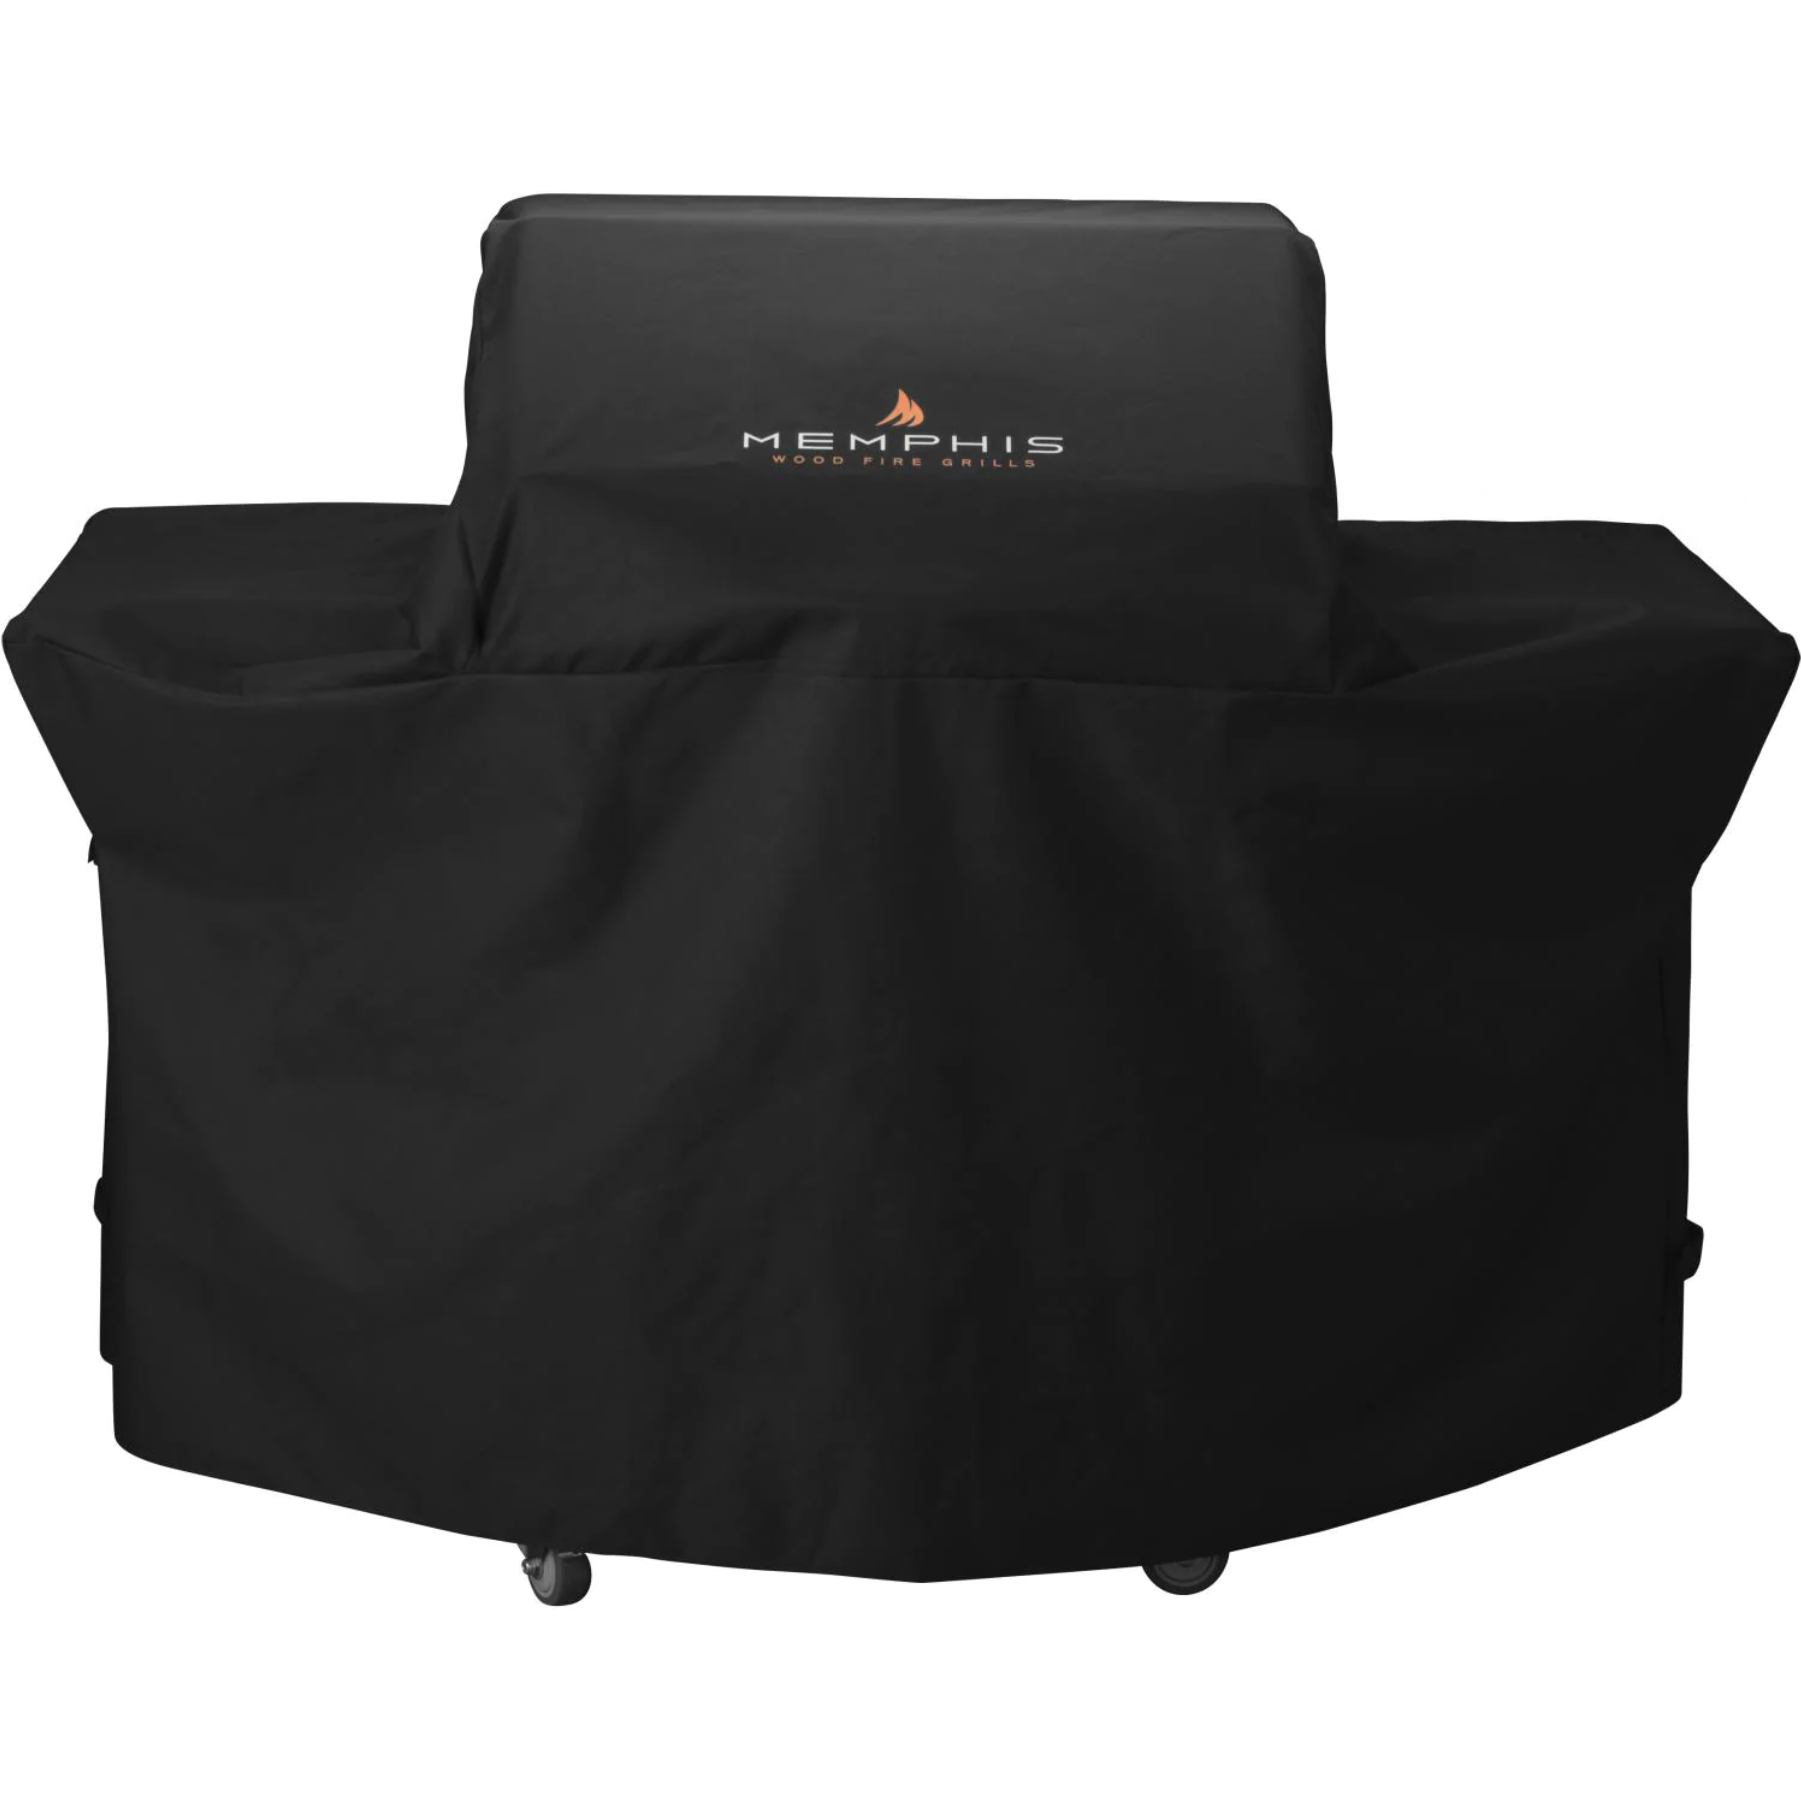 Memphis Grills Pro Series Freestanding Grill Cover